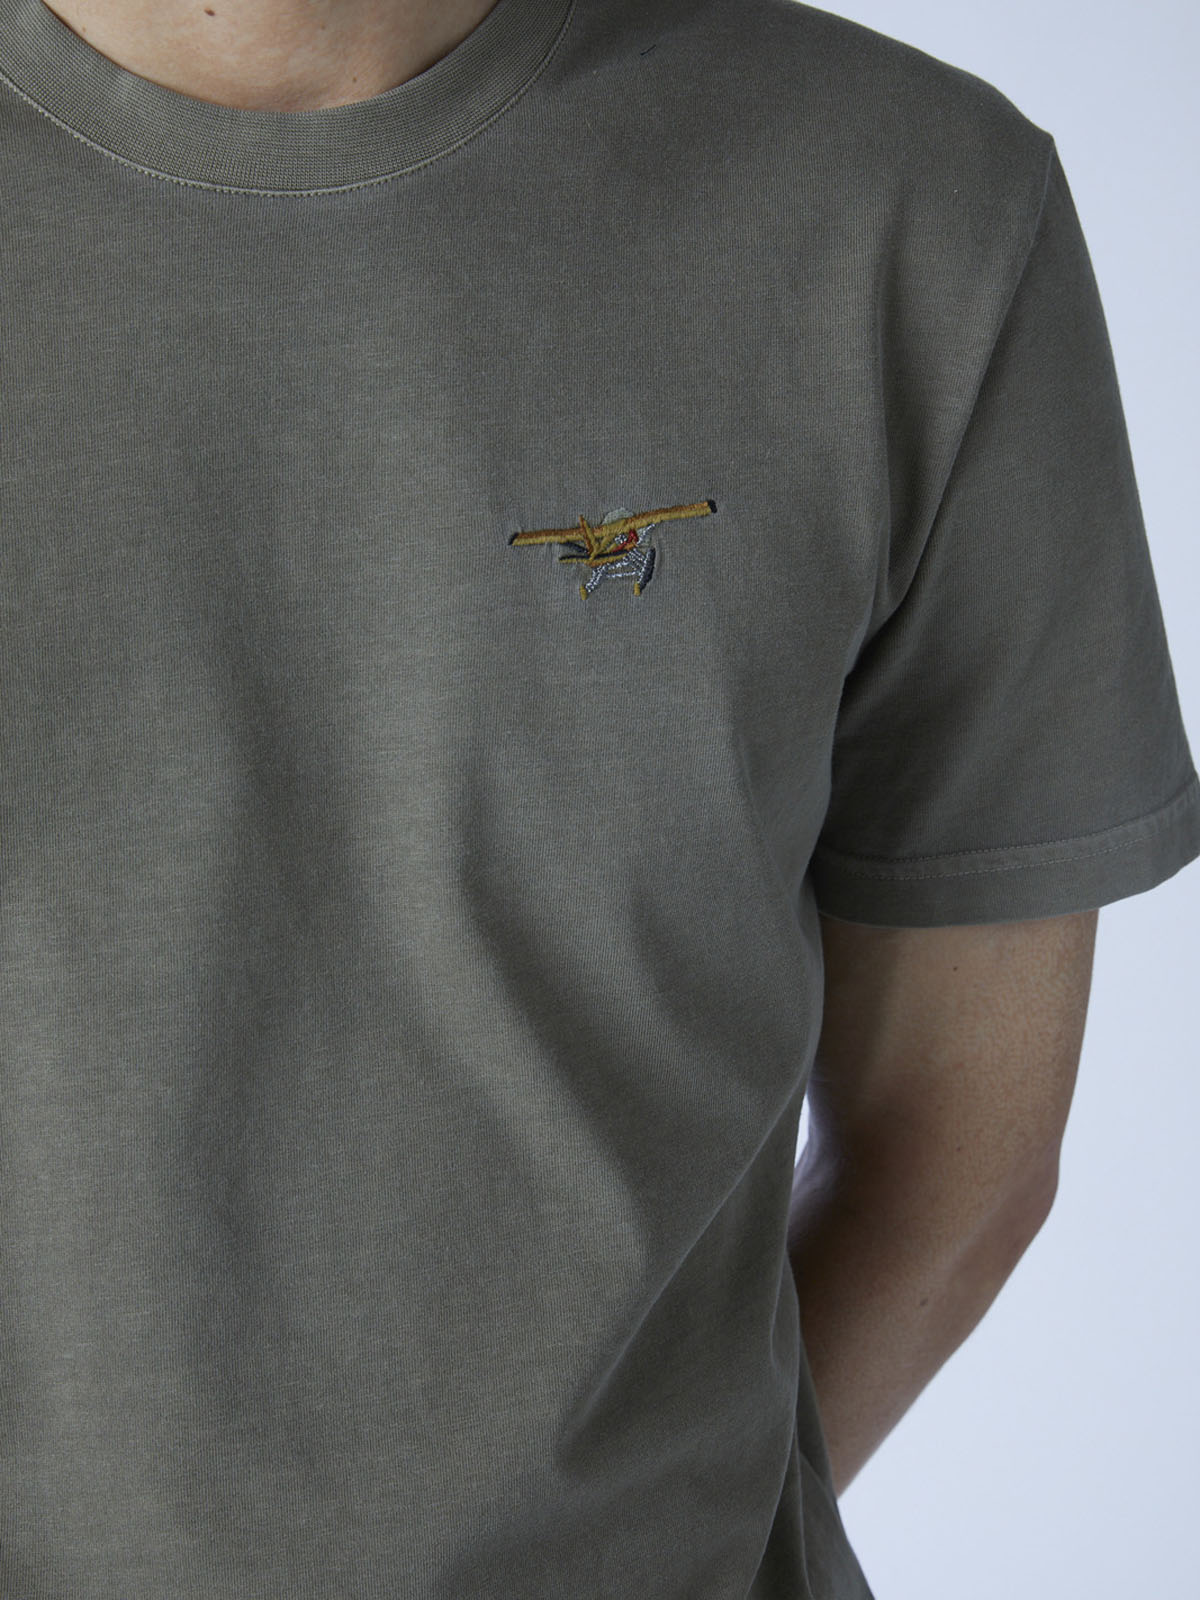 Amba T-shirt with aircraft embroidered